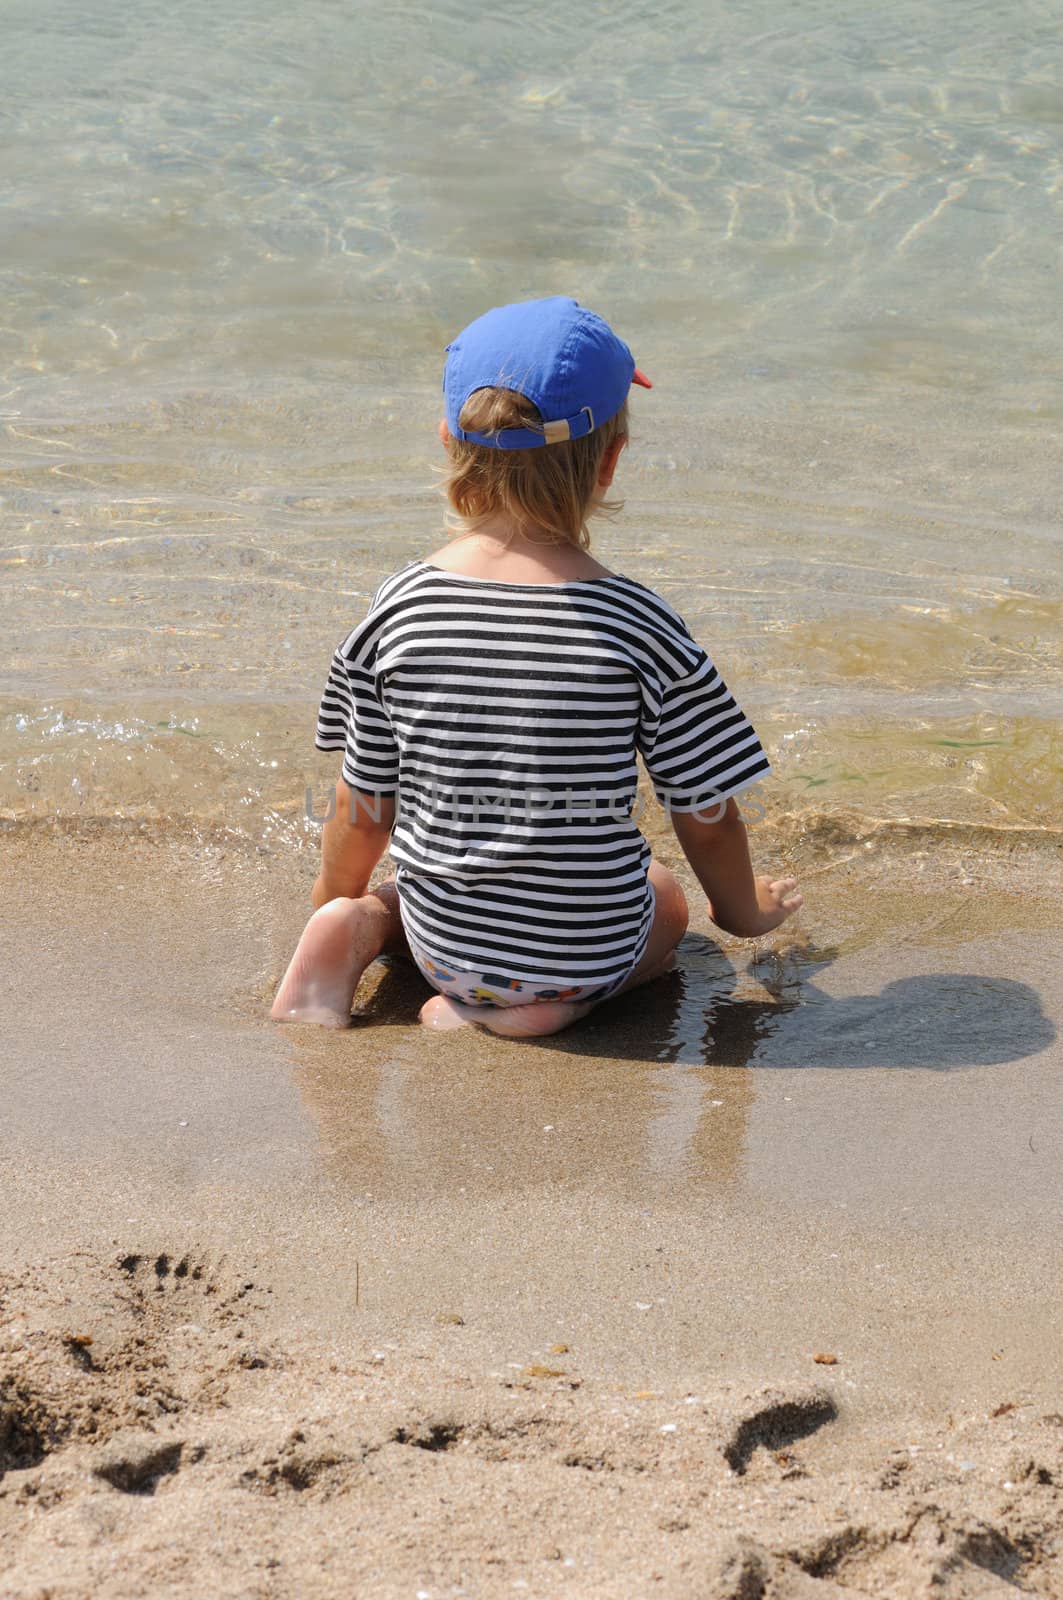 The child sits on a beach and looks in the sea